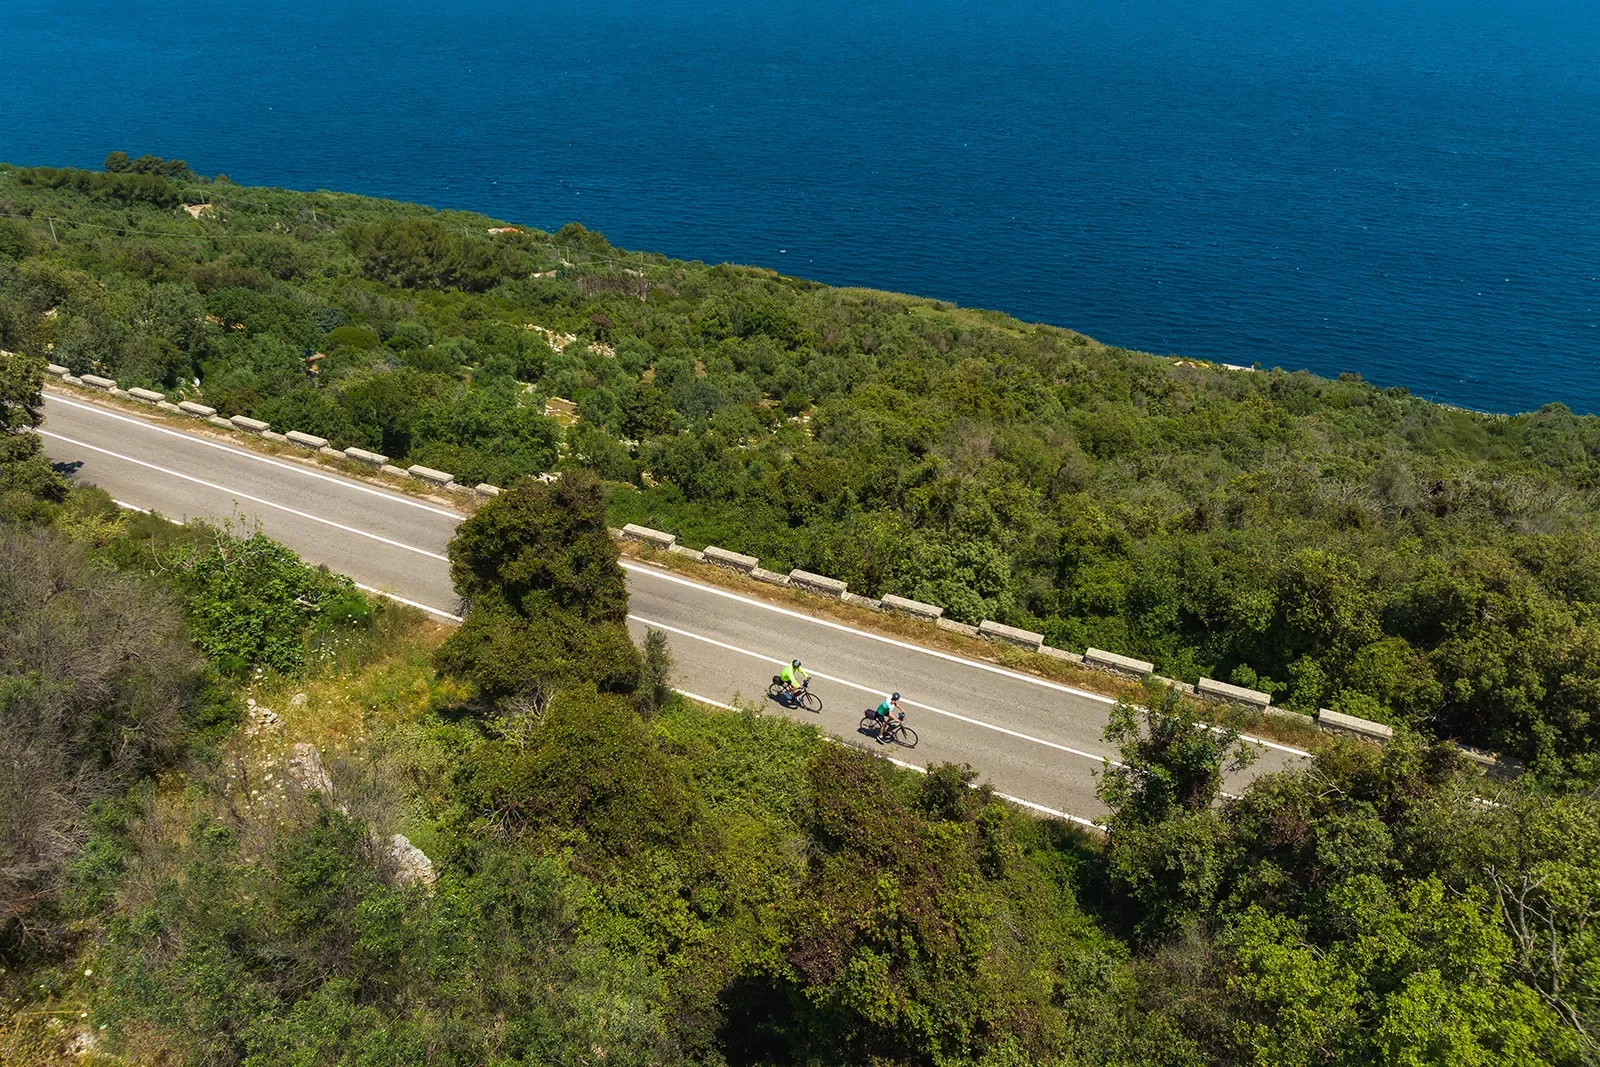 Aerial shot of two guests cycling down coastal road, forest and ocean in background.